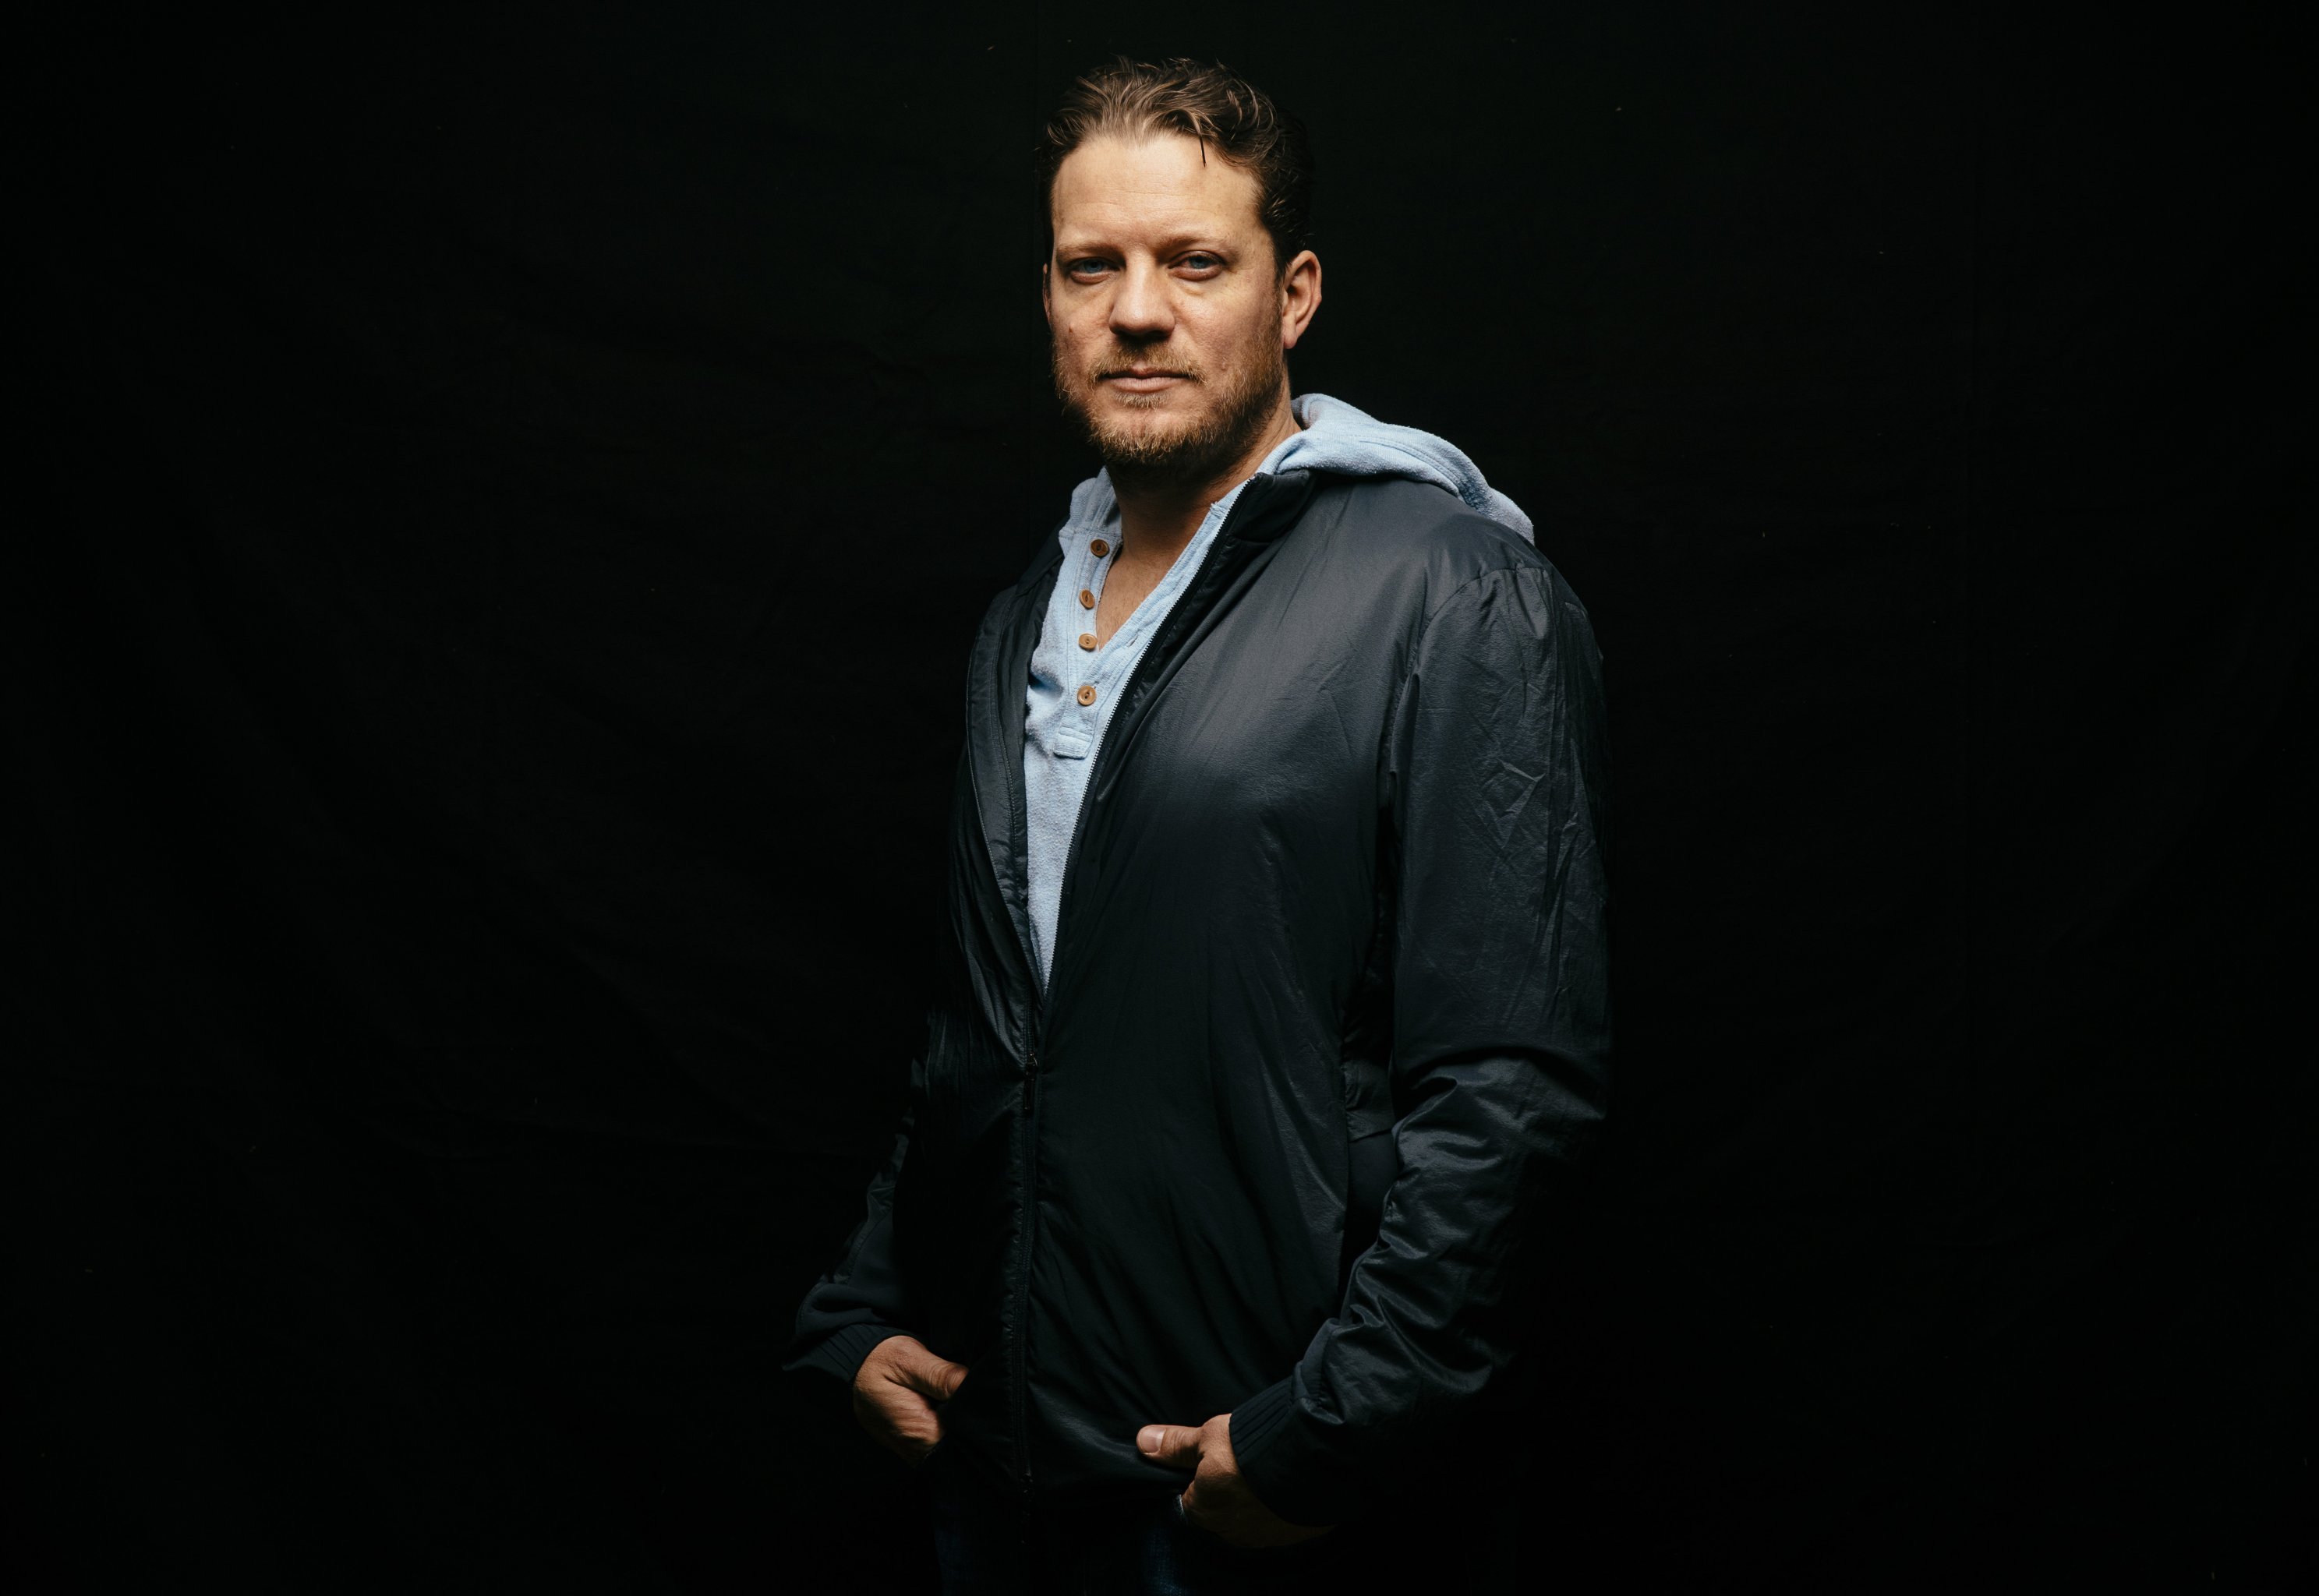 New Red Sox starter Peavy talks guitar, pitching, his grandfather and more, Sports